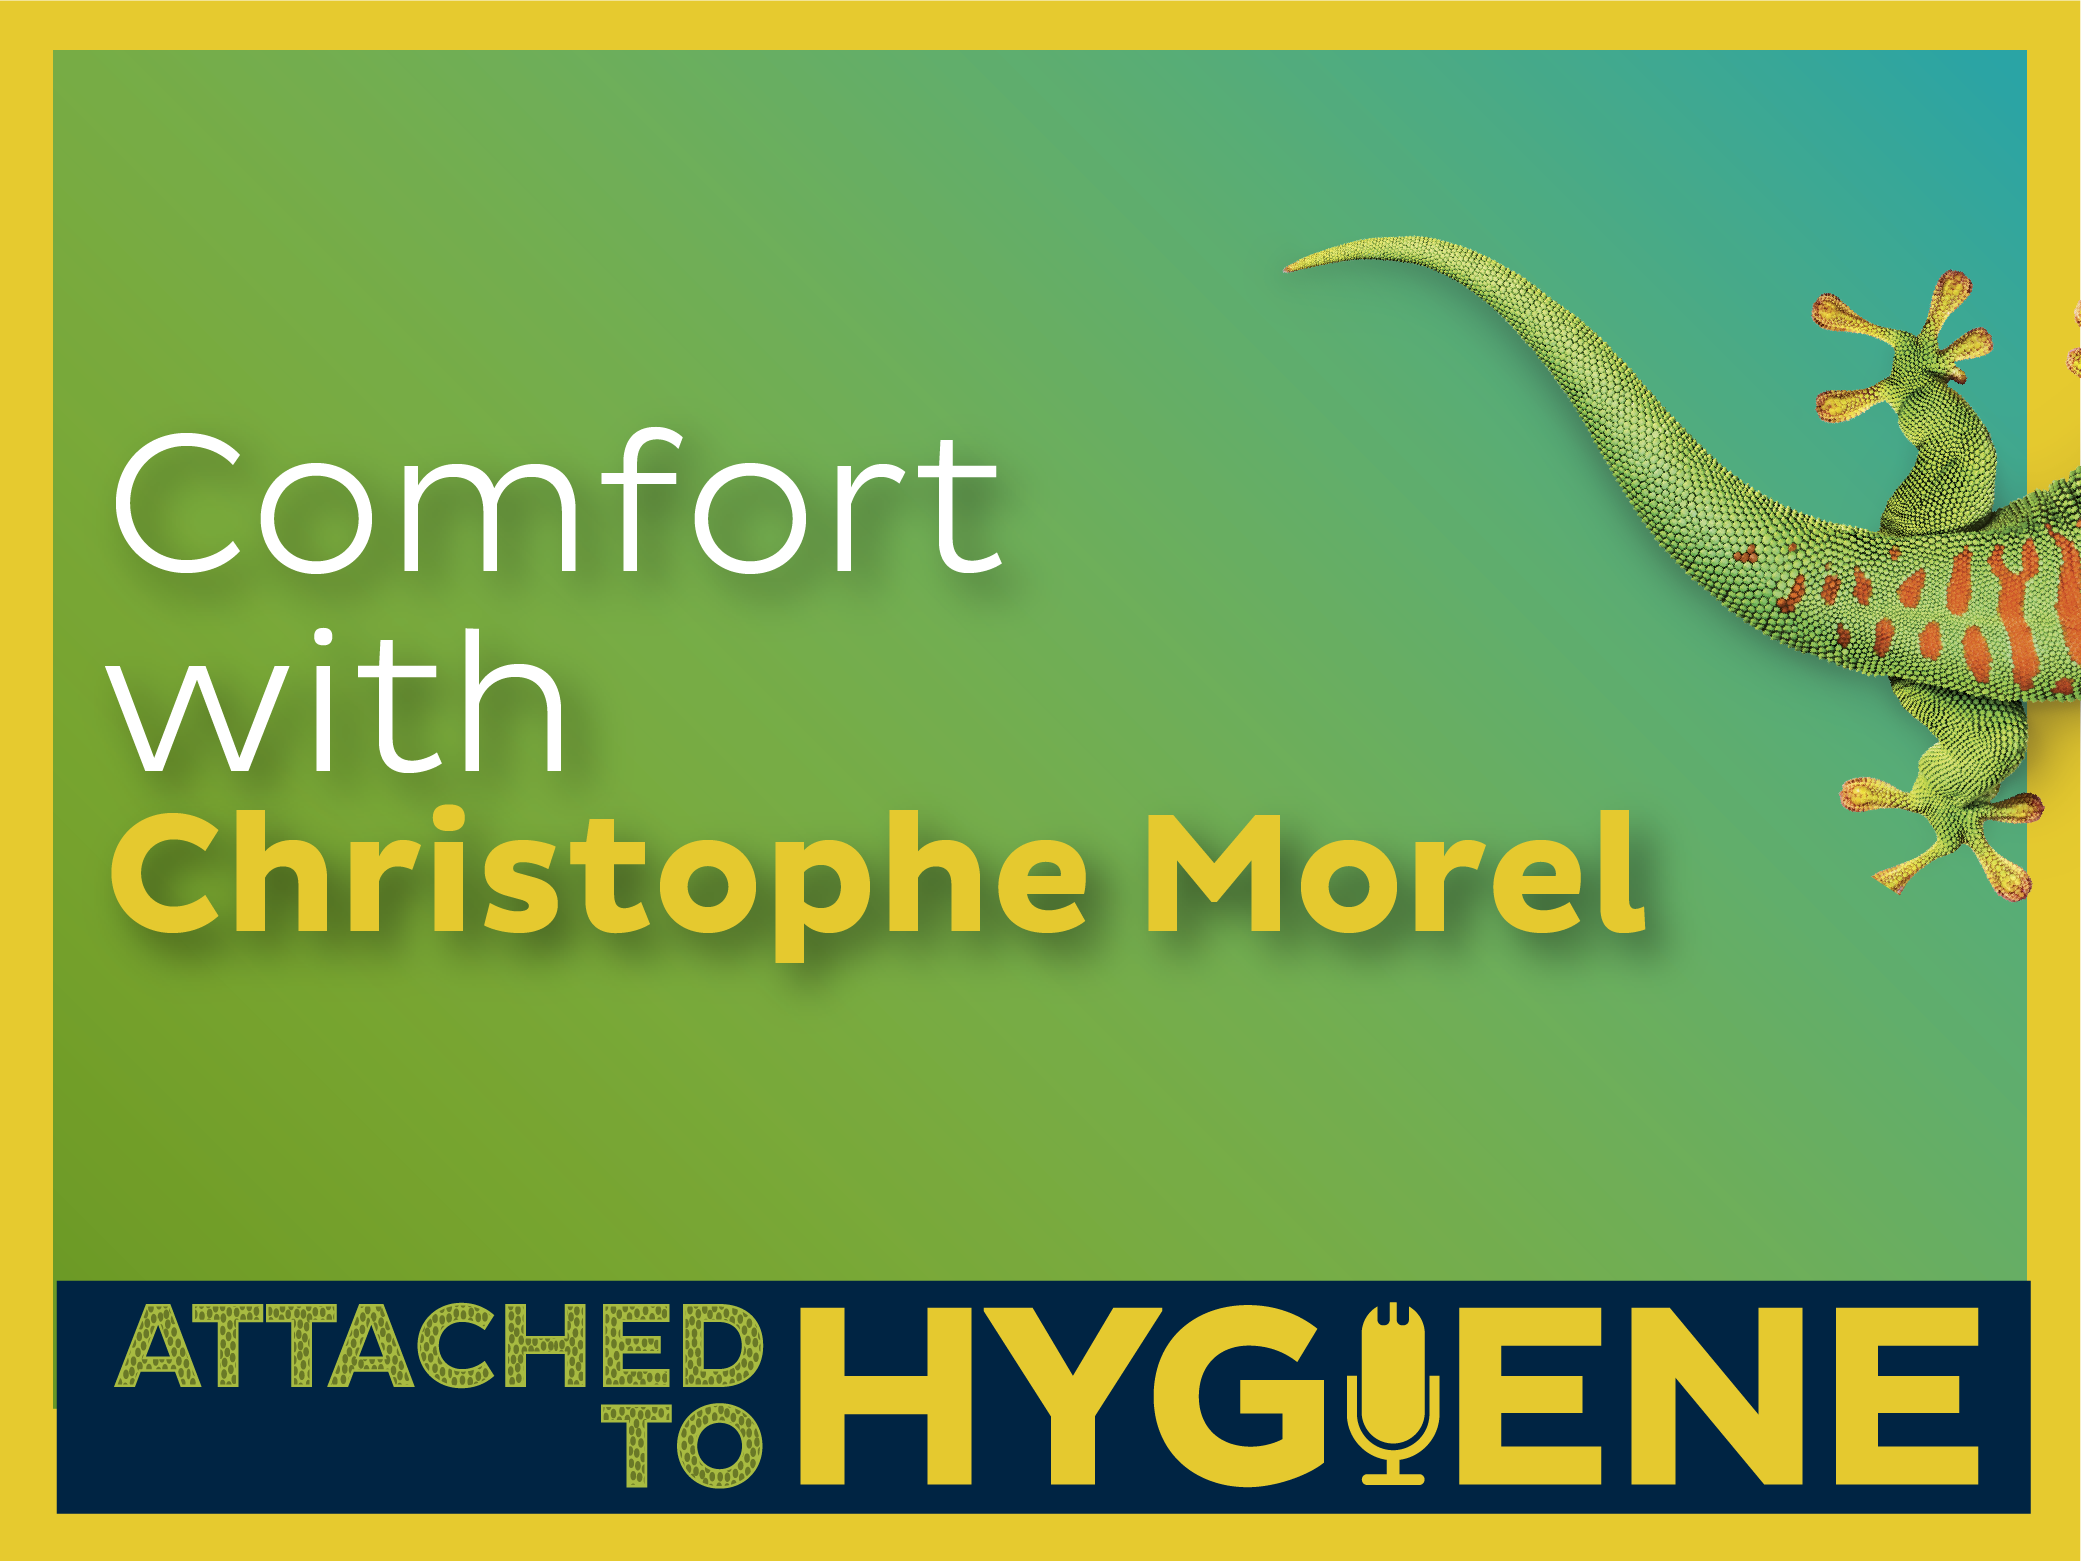 Comfort-with-Christophe-Morel